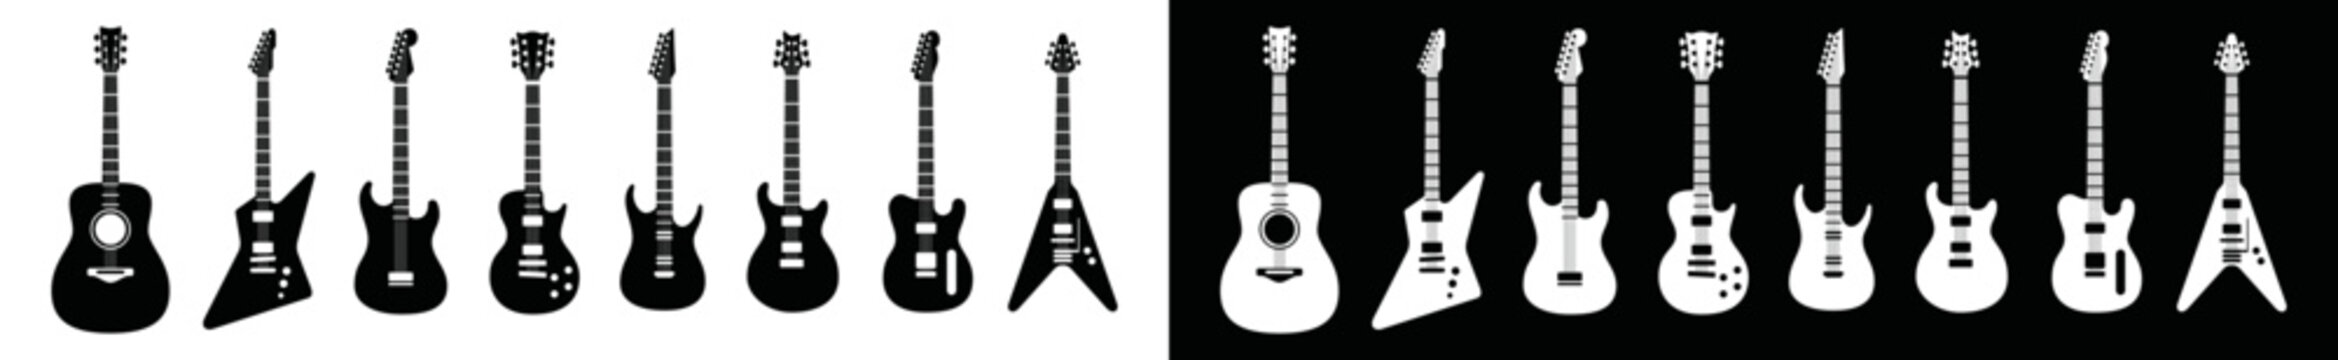 Guitar icon set. Acoustic guitar icon. Classical guitar or Electric guitar symbol for apps or websites, vector illustration